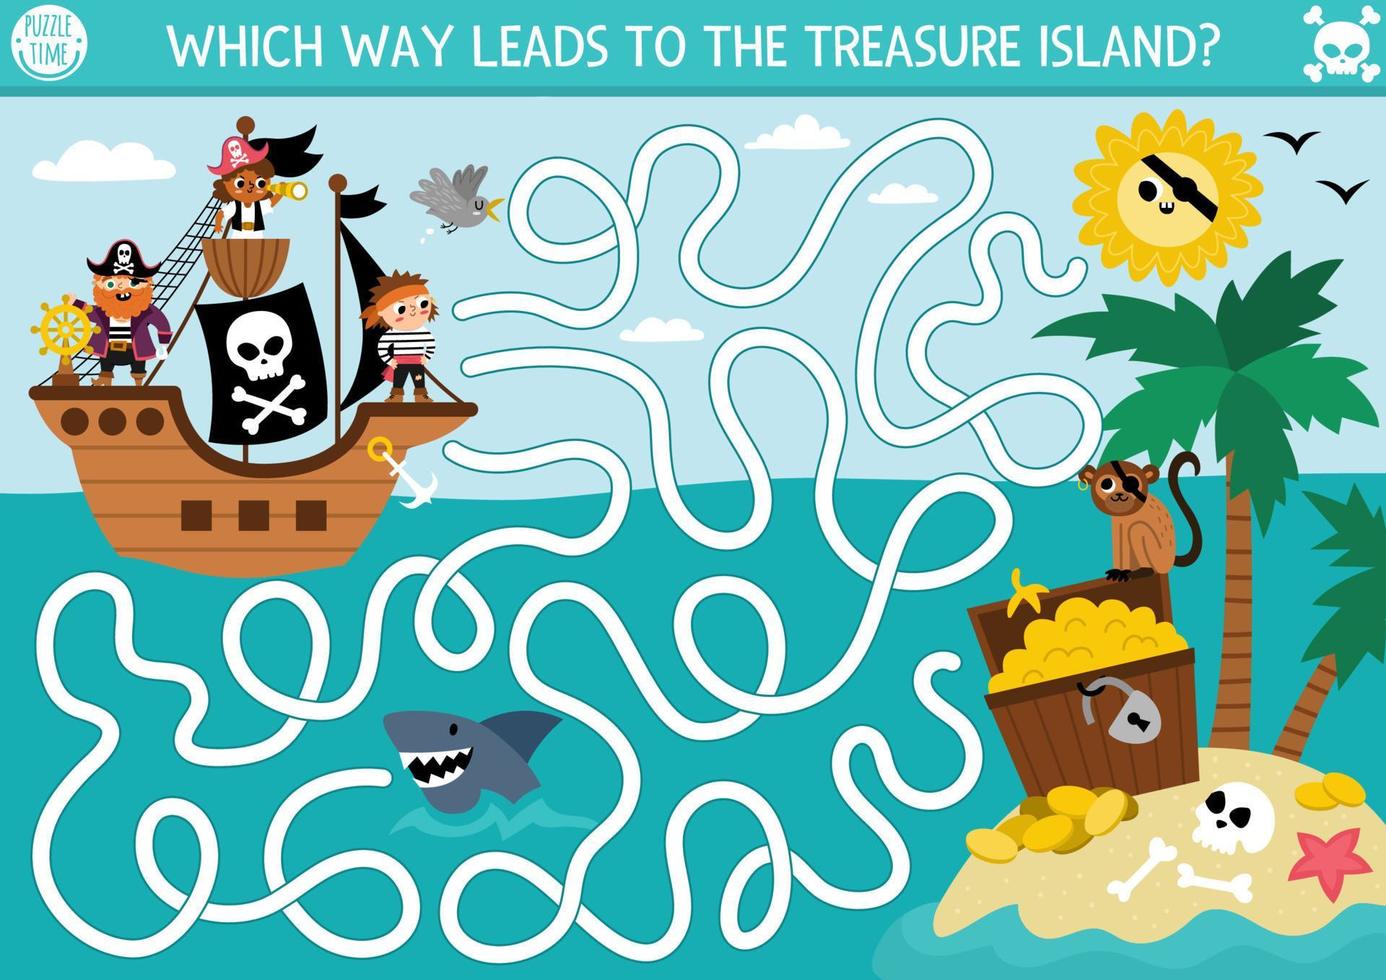 Pirate maze for kids with marine landscape, ship, treasure island. Treasure hunt preschool printable activity with chest, coins, shark, sun, palm trees. Sea adventures labyrinth game or puzzle vector